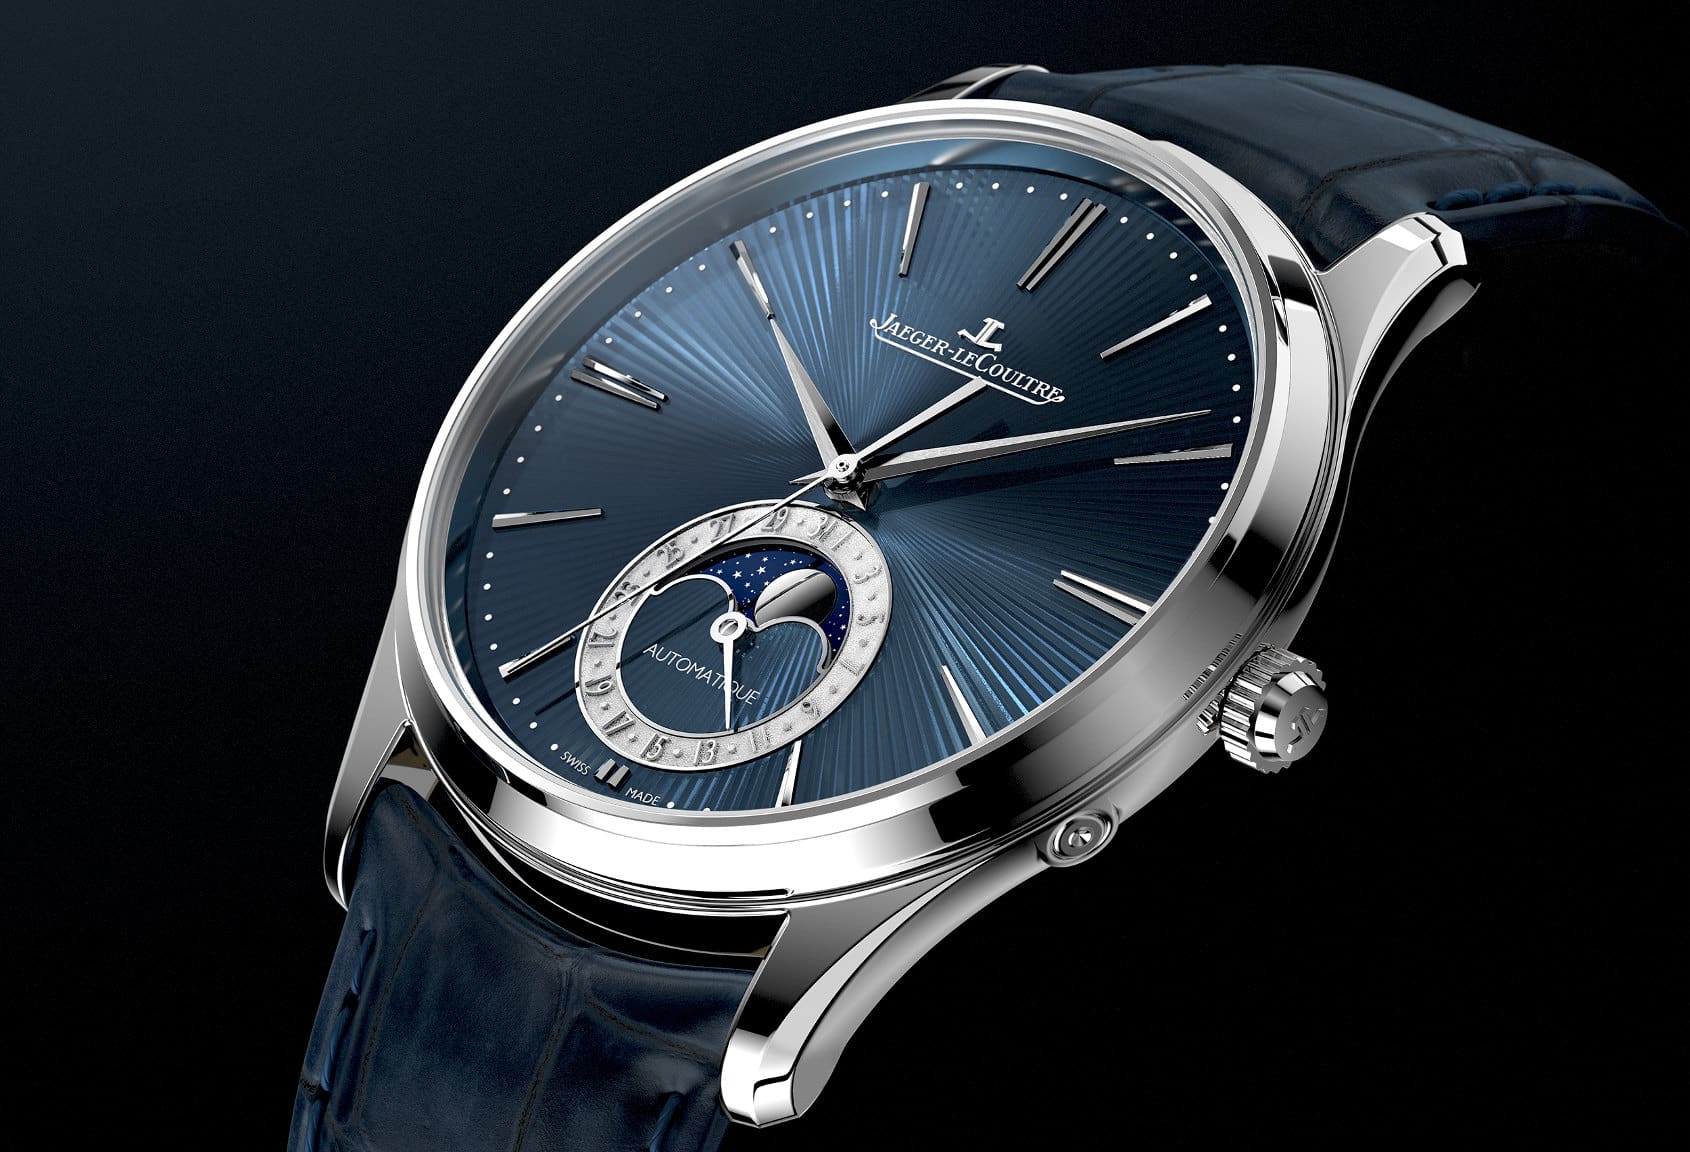 INTRODUCING: The Jaeger-LeCoultre Master Ultra Thin Moon Enamel